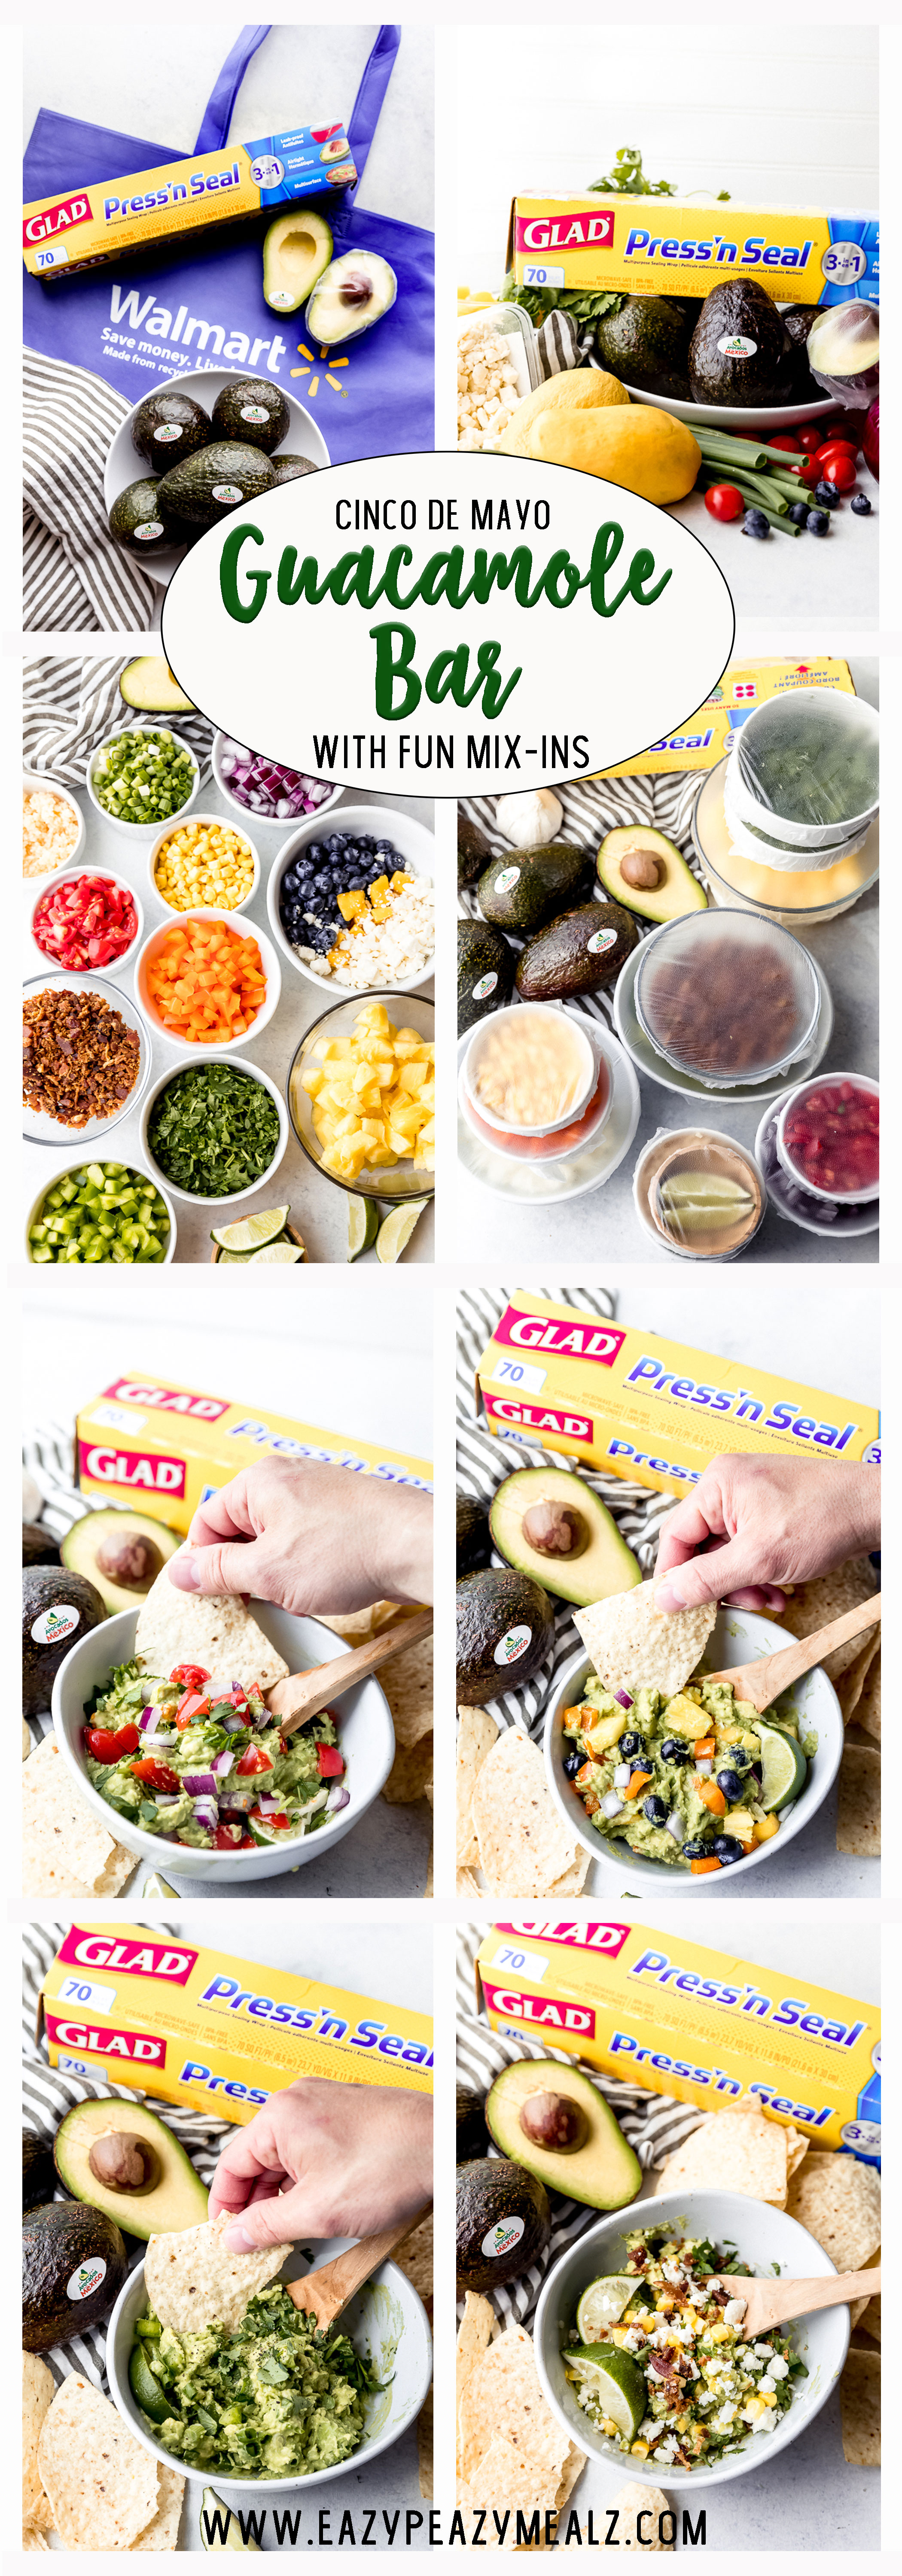 Everything you need to know to make the perfect guacamole bar with all the fun mix-ins